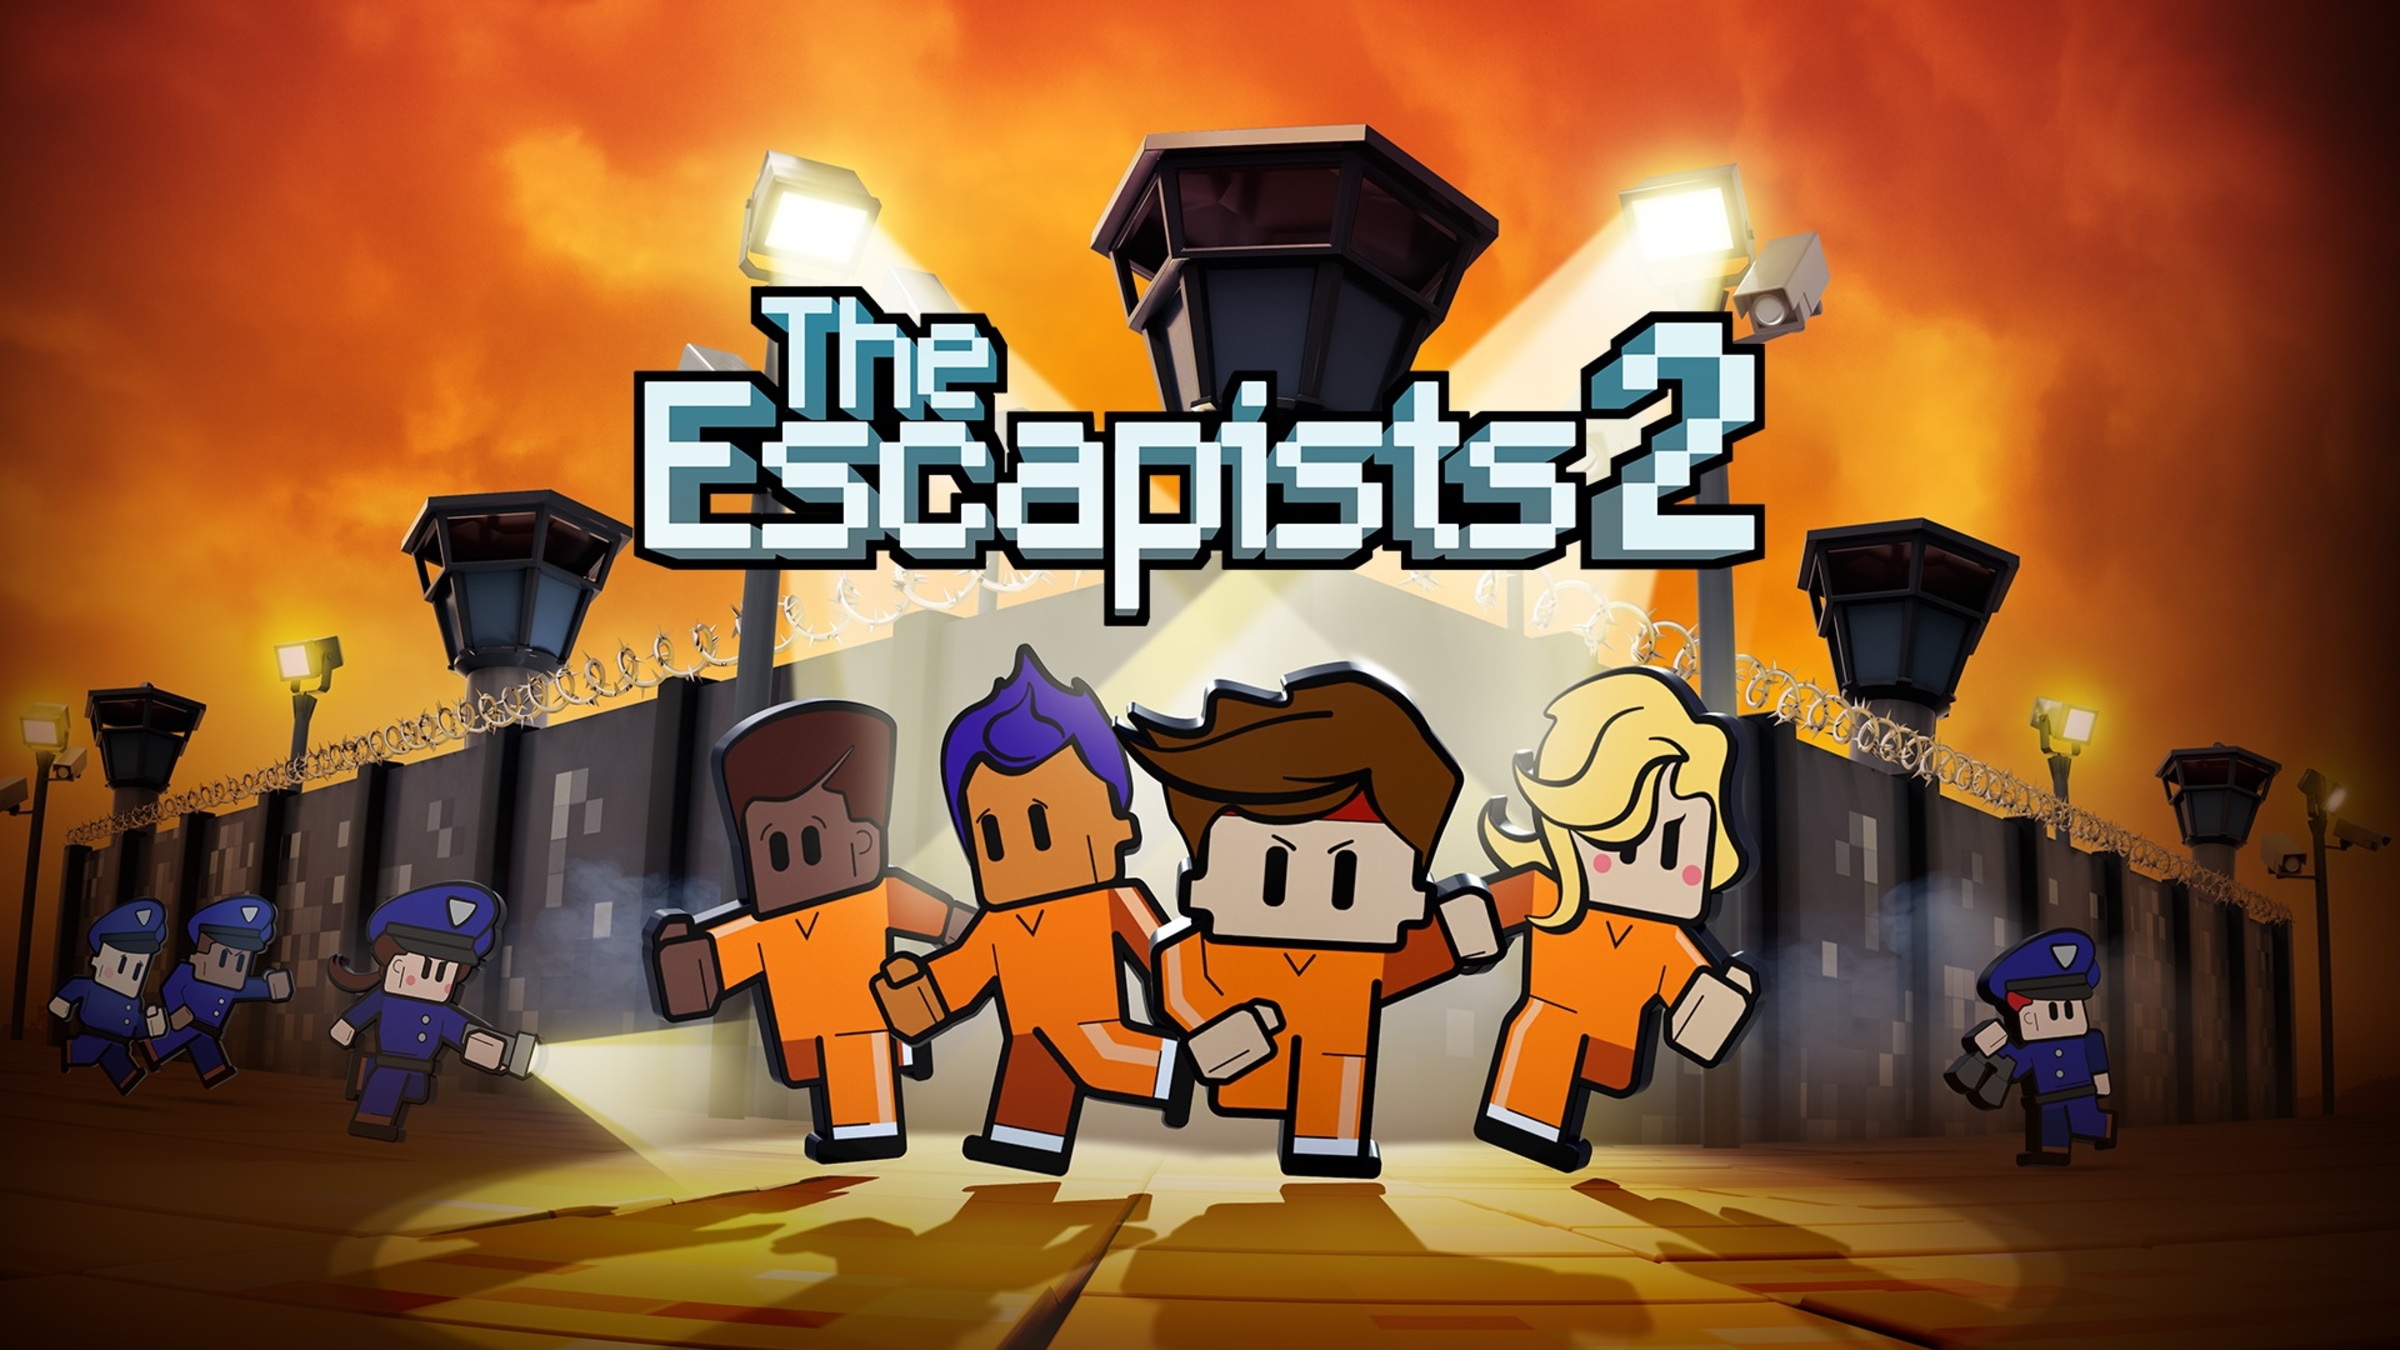 i used to watch some minecraft prison escape series 5 or so years